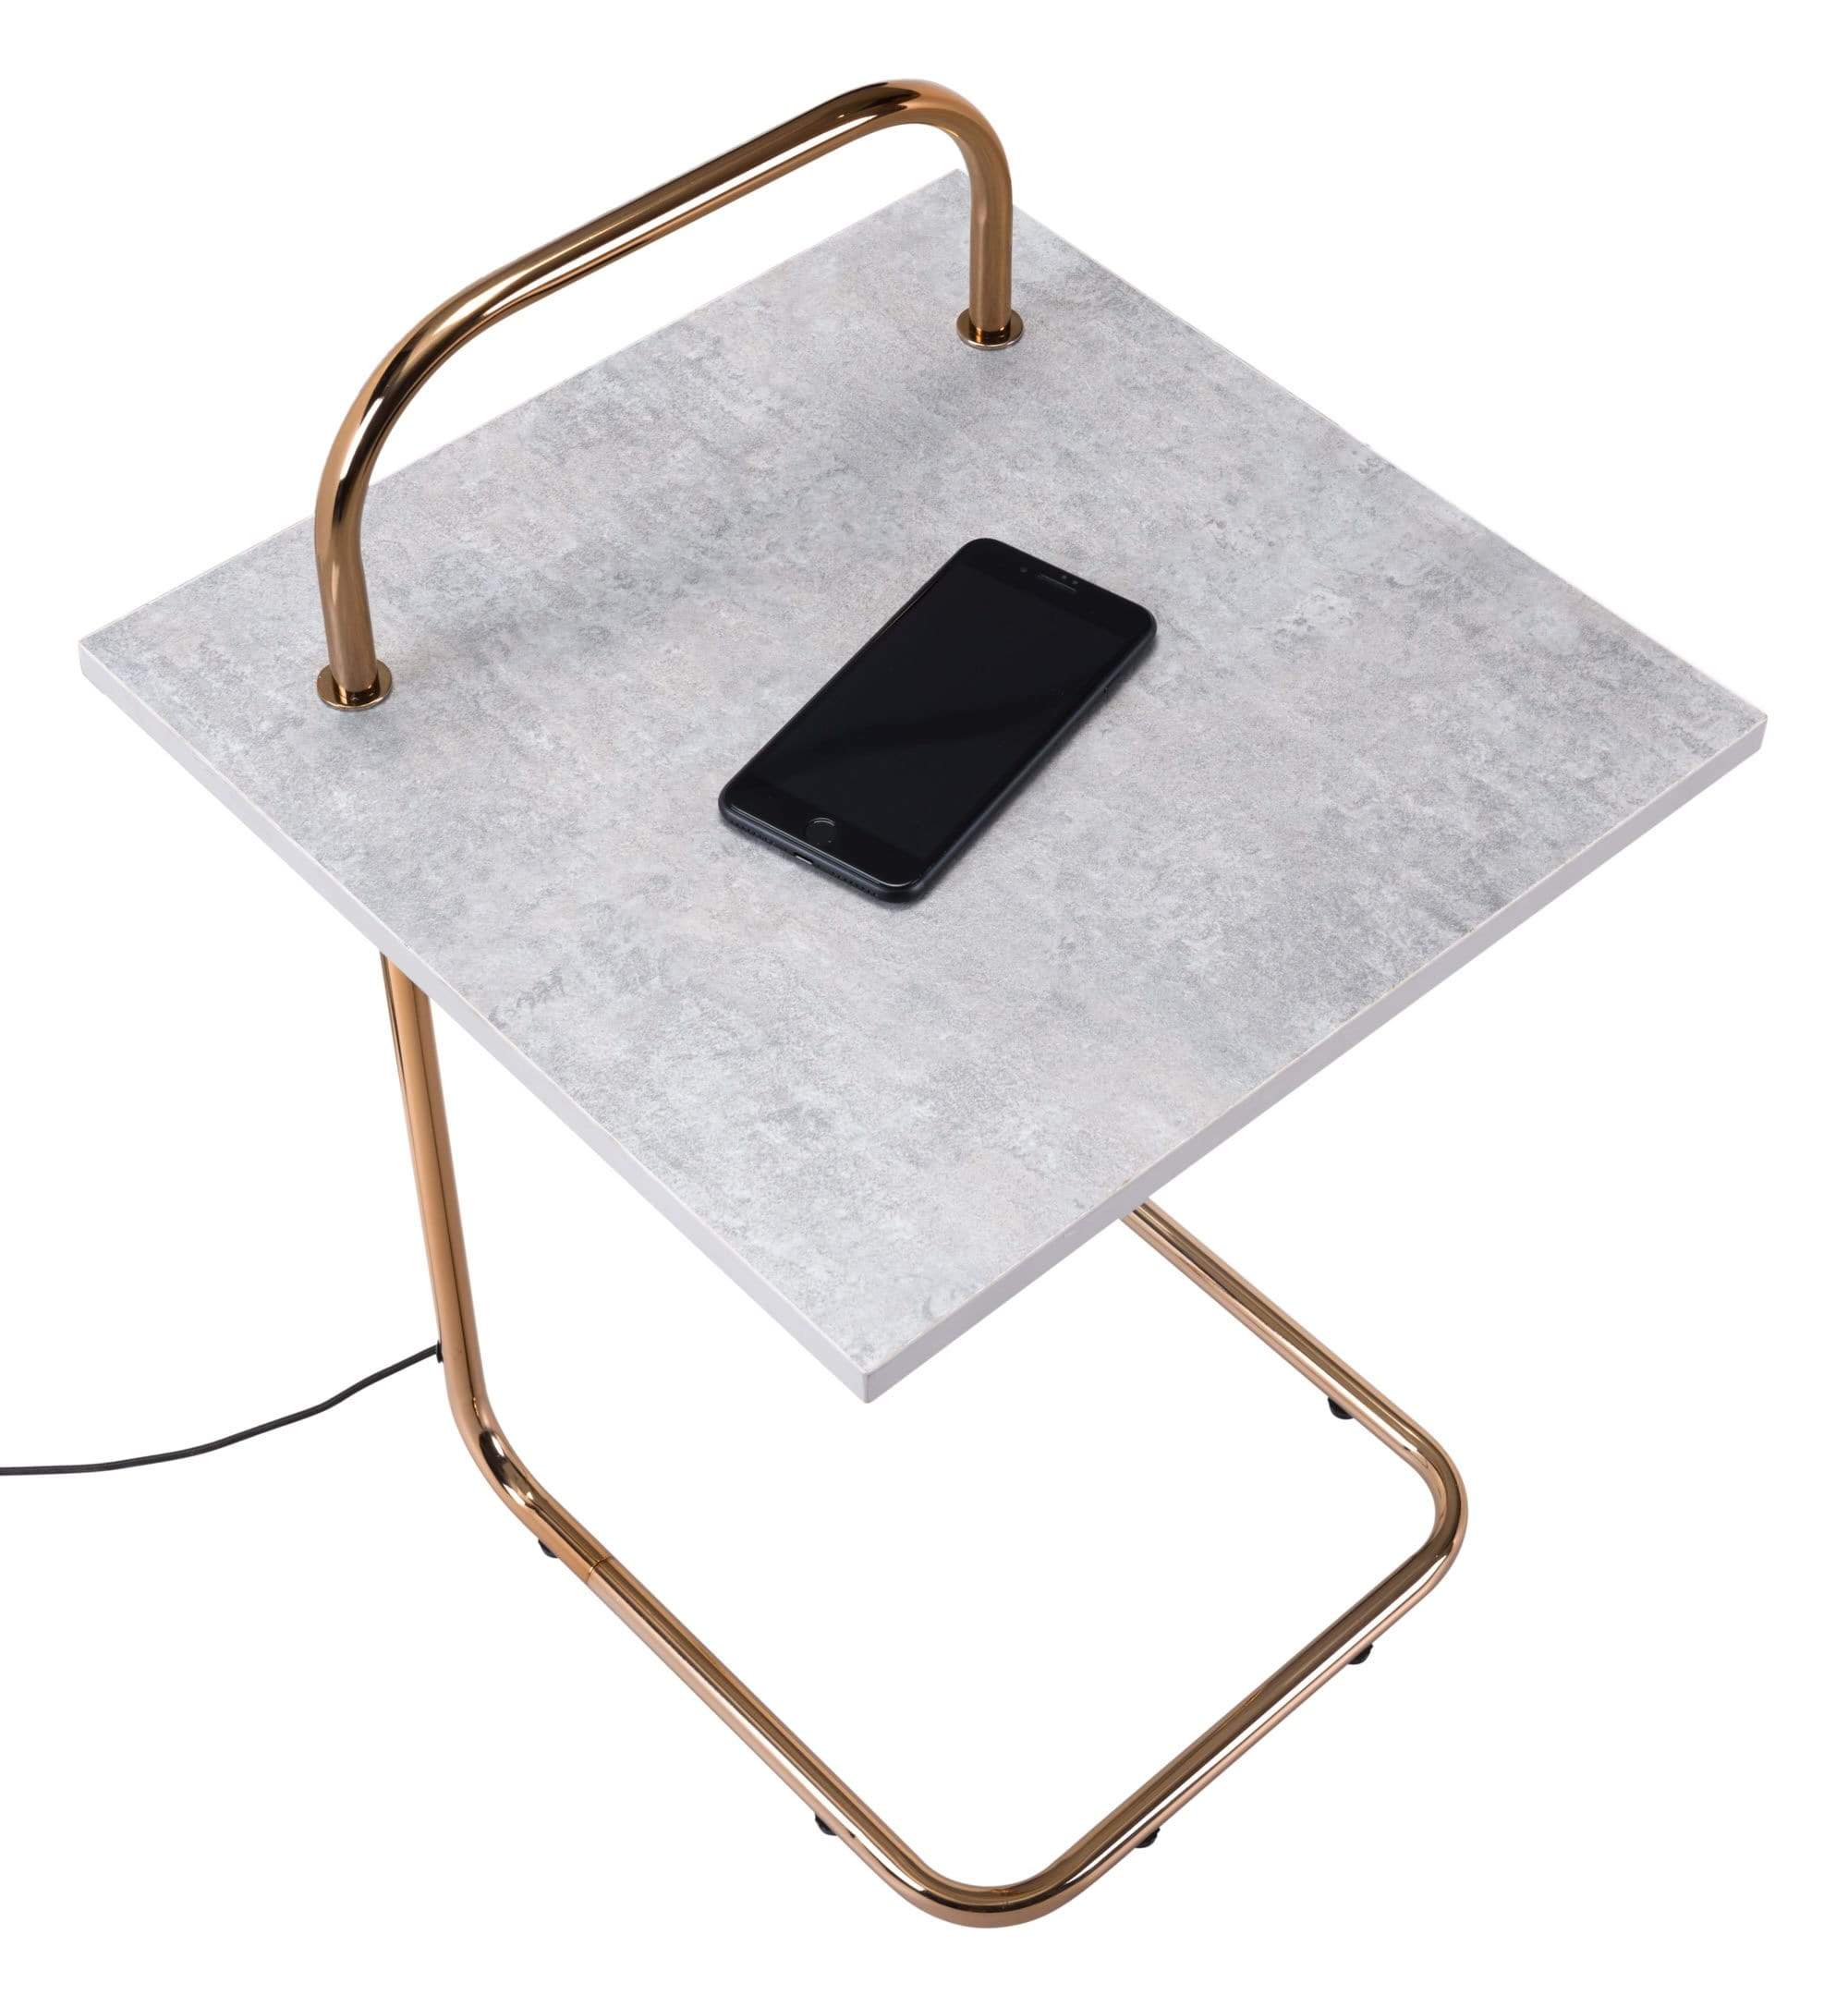 HomeRoots Outdoors Outdoor Furniture > Outdoor Tables Gray & Gold / Formica, Steel 15.7" x 15.7" x 29.7" Gray & Gold, Formica, Steel, Wireless Charging Side Table